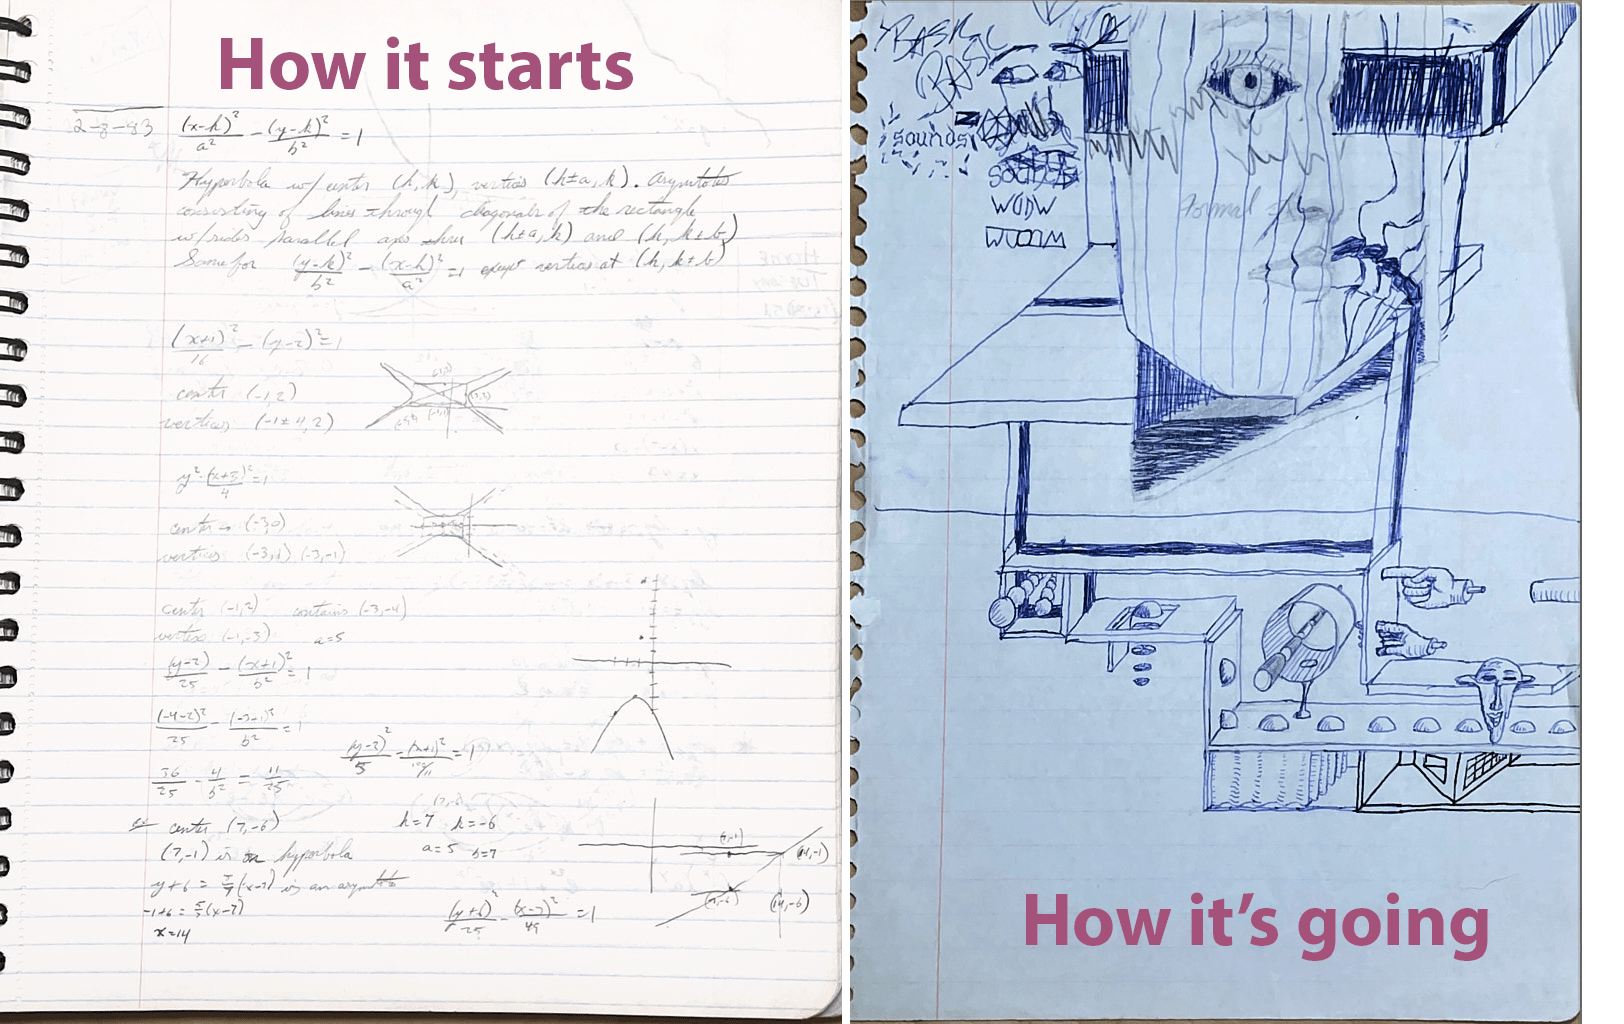 Notebooks - how it starts vs how it's going